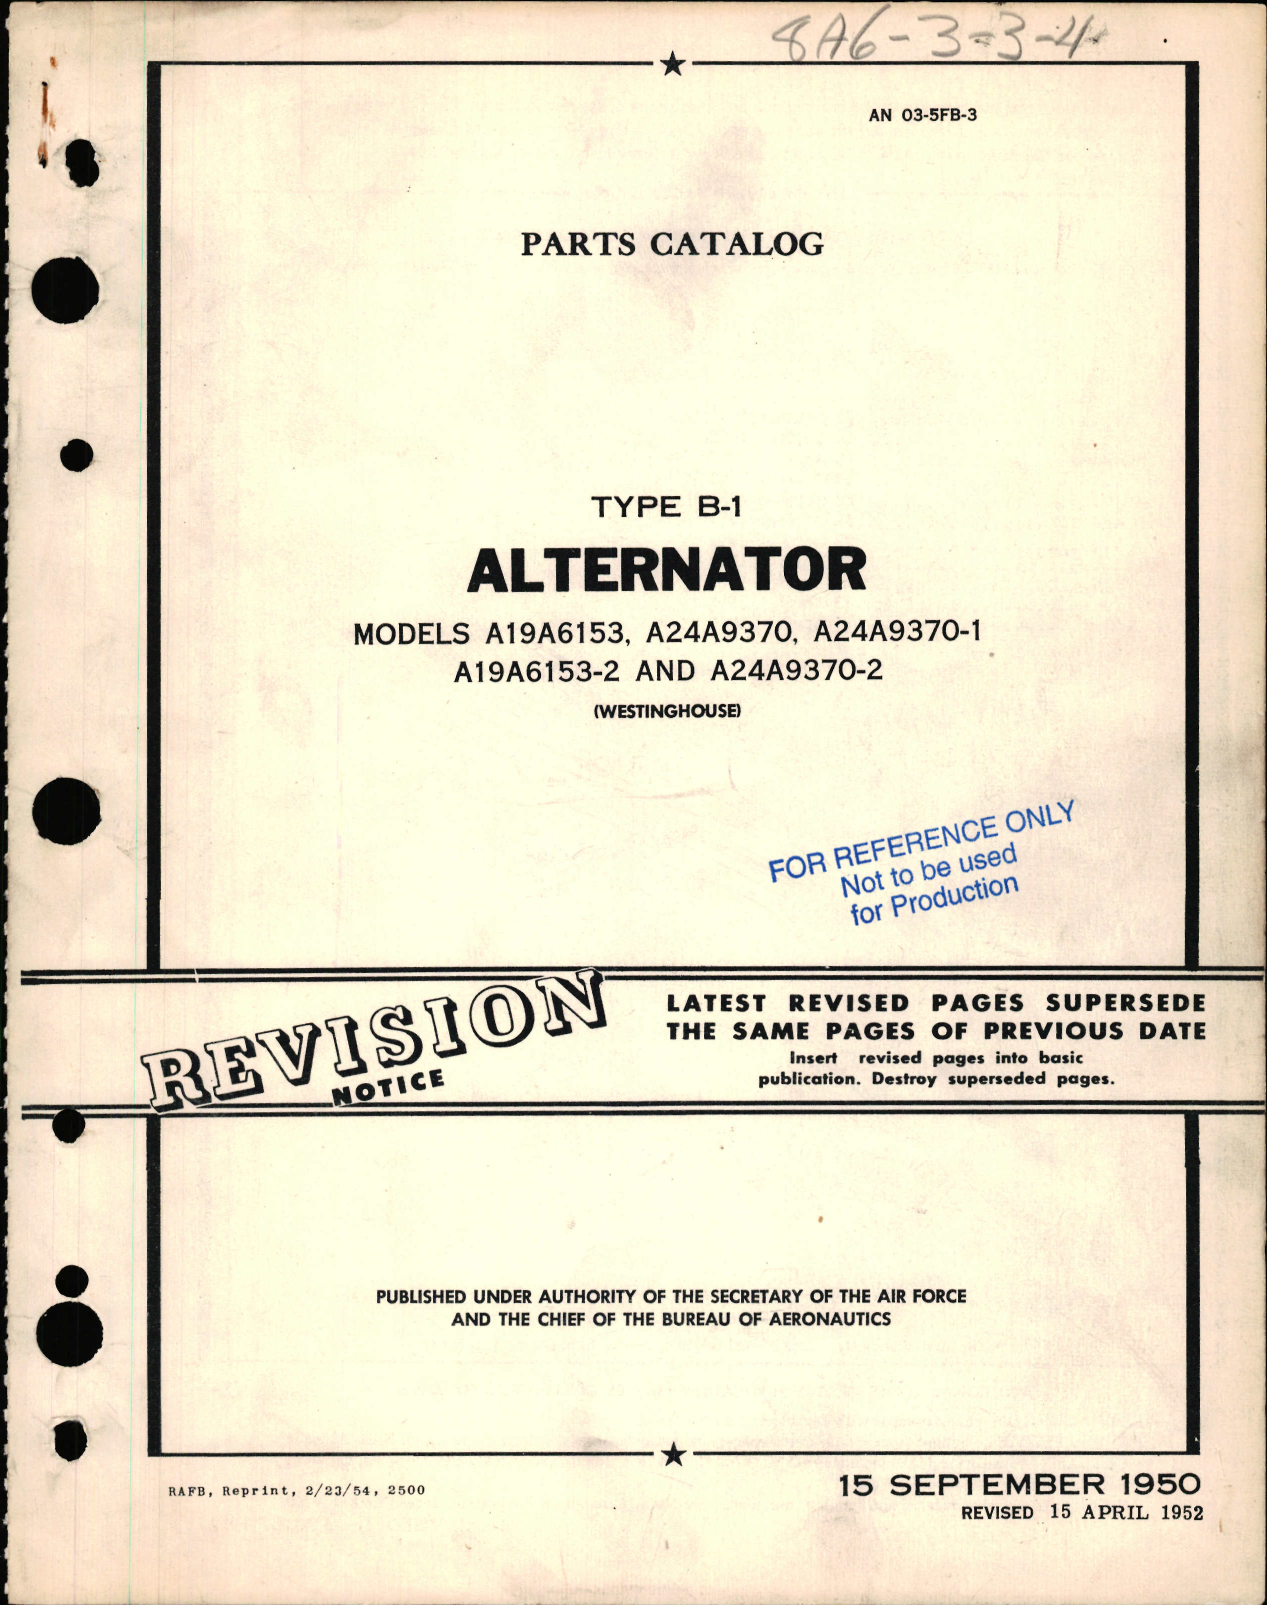 Sample page 1 from AirCorps Library document: Parts Catalog for Type B-1 Alternator